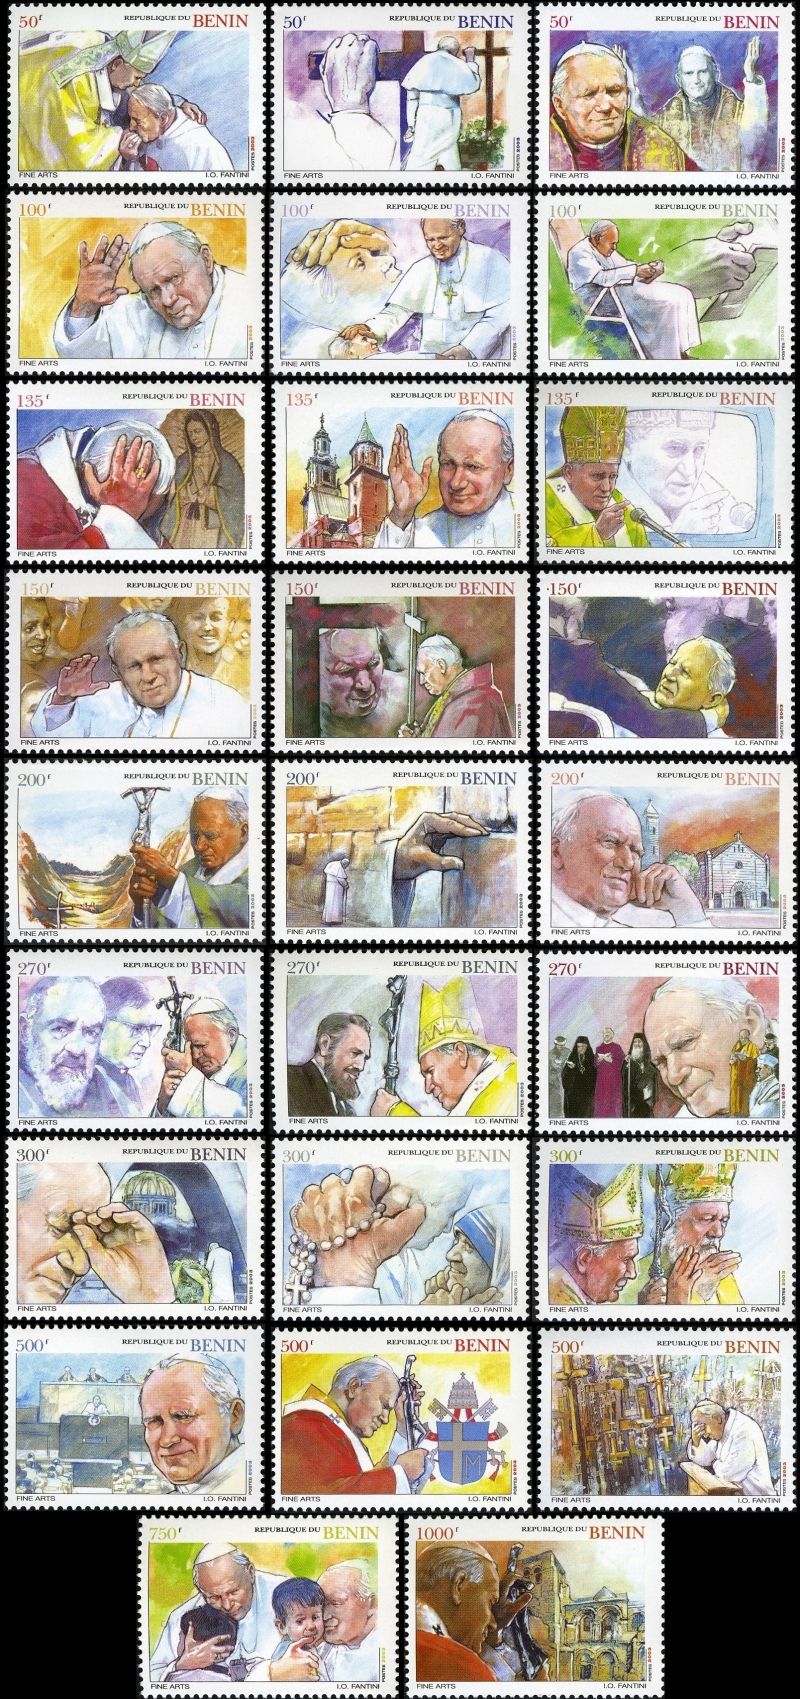 Benin 2003 The Travels of Pope John Paul II Stamps Shown on the WNS System